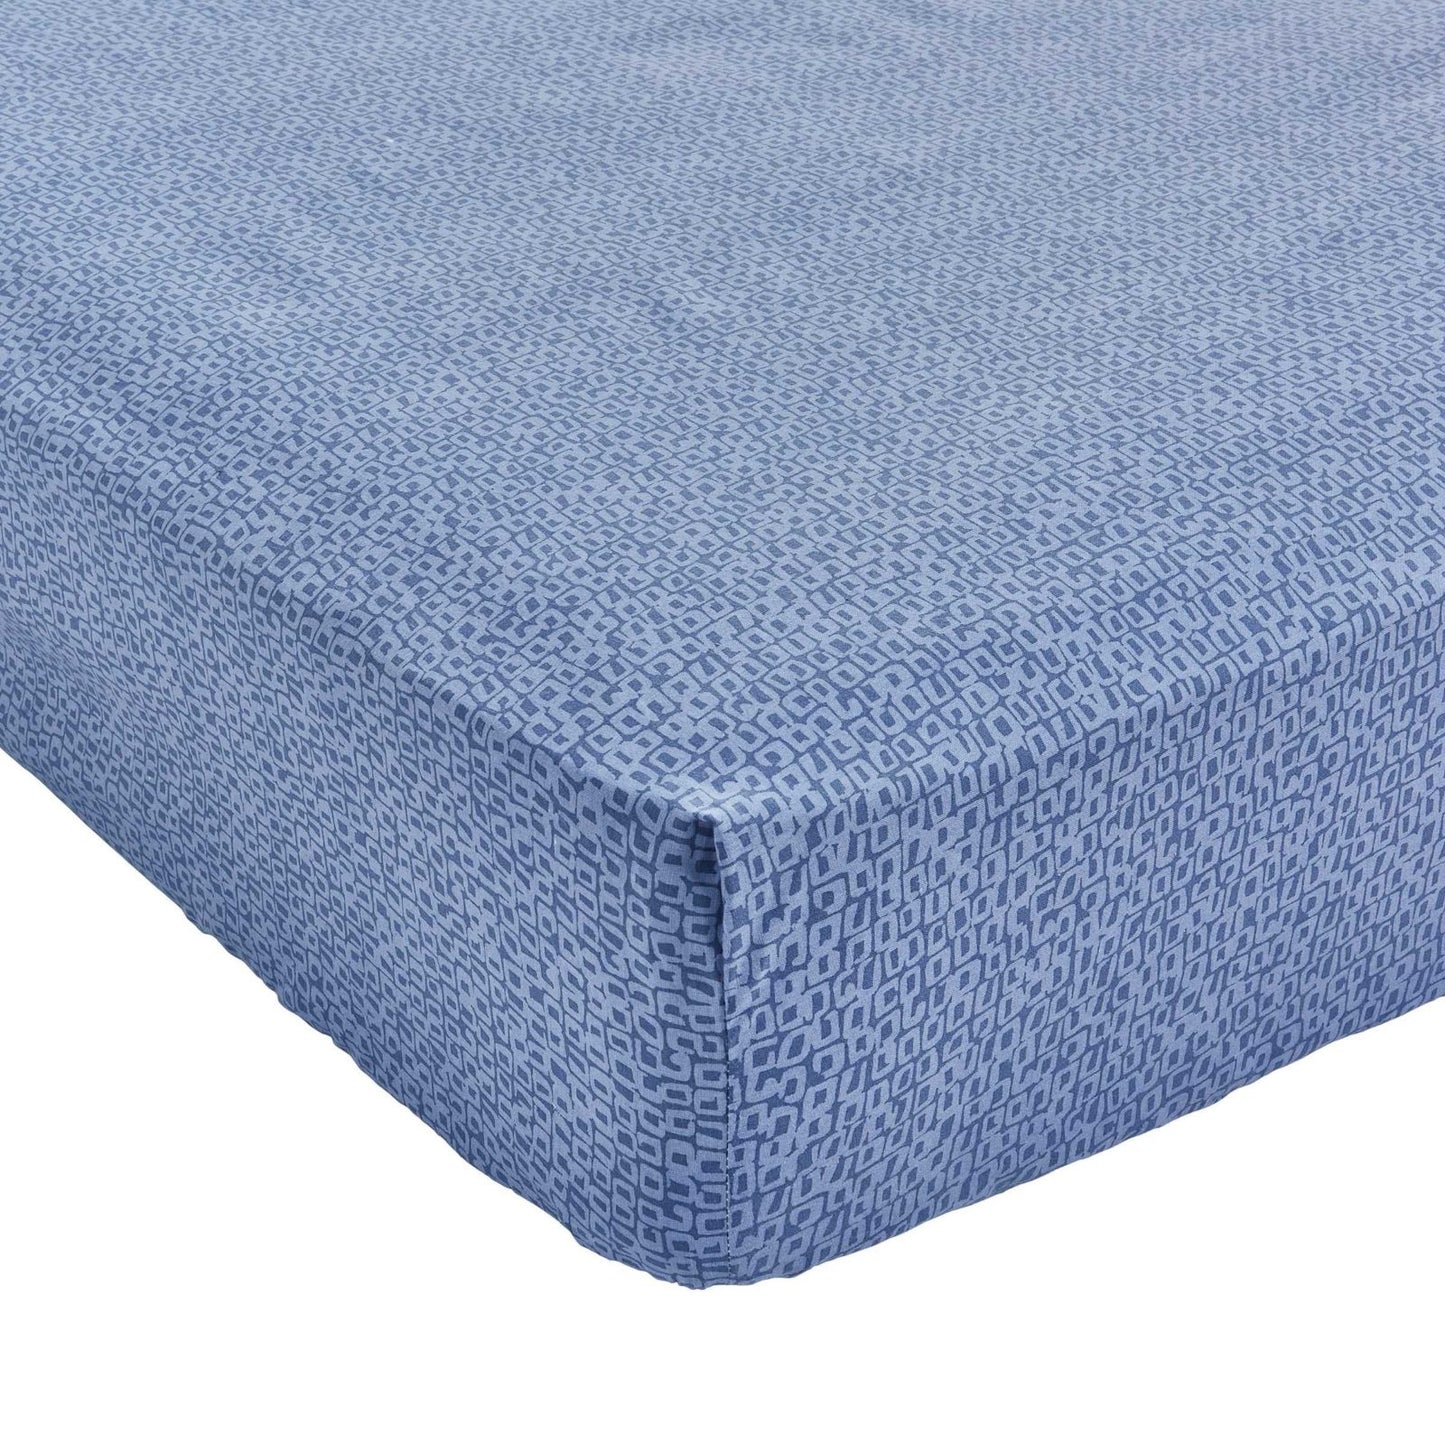 COSMOS/VIVA FITTED SHEET  NAVY